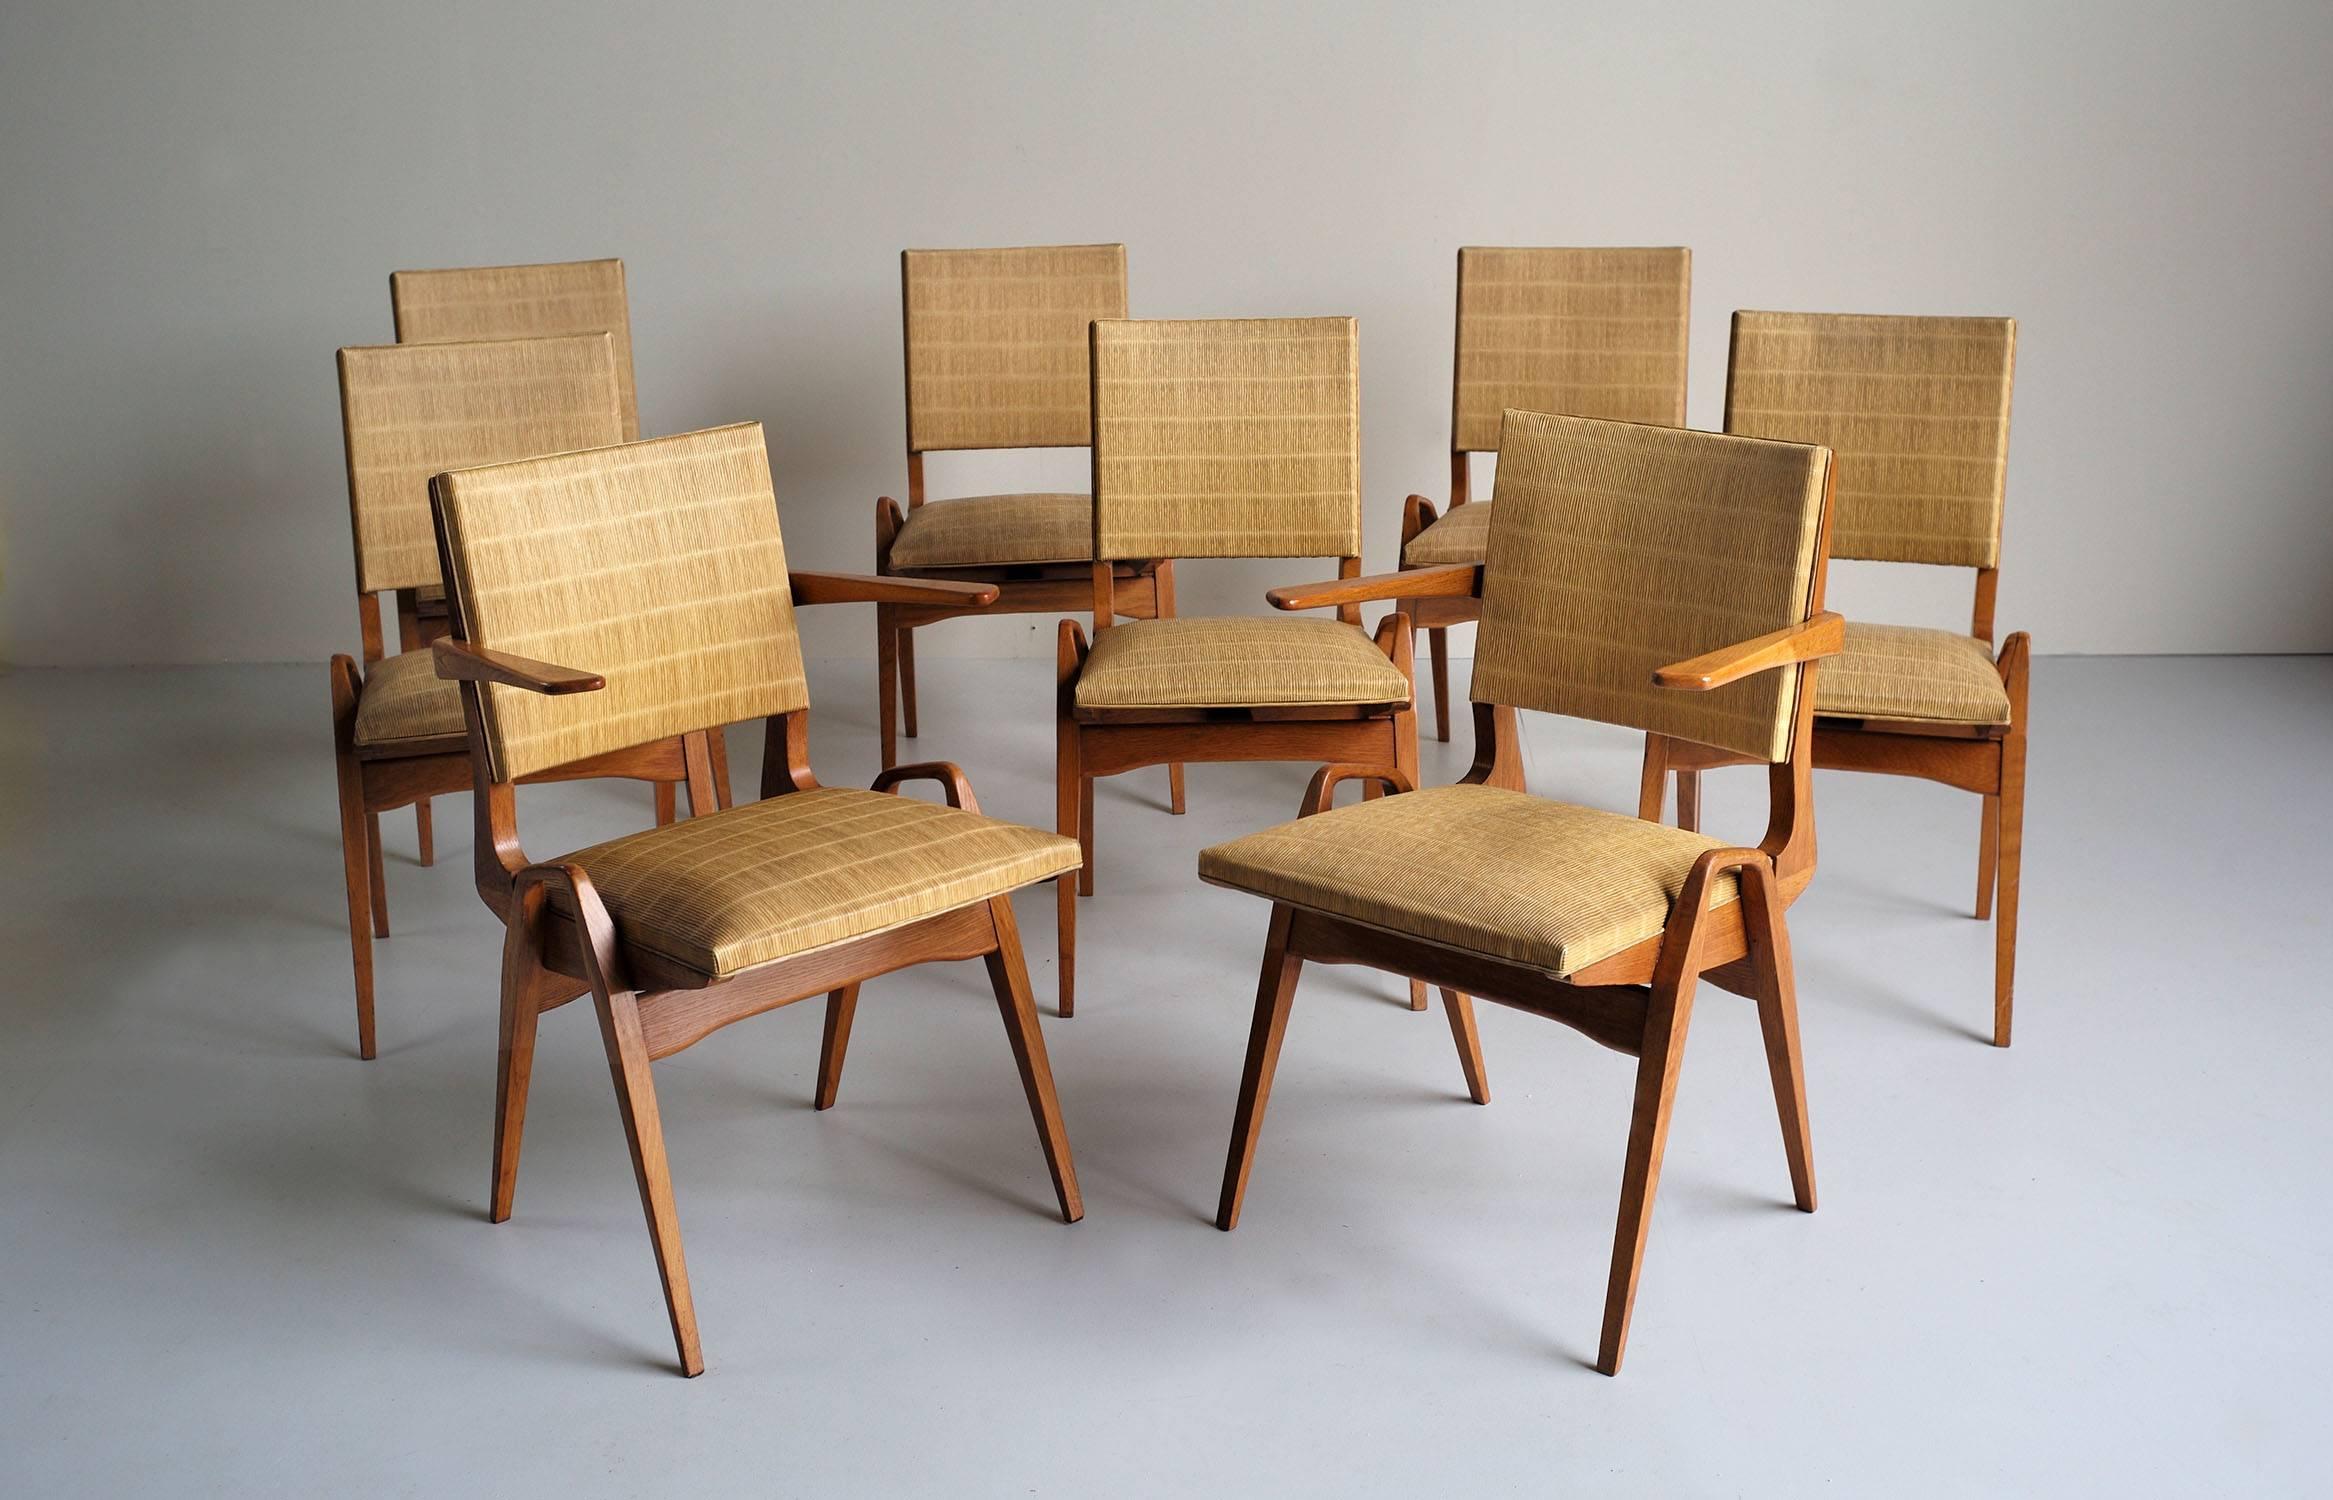 Rare series of six chairs and two armchairs by Maurice Pré, France, 1950.
Structure in varnished oak, seat and back covered with a very beautiful imitation leather imitating braided straw. Maurice Pré, companion and collaborator of Jeannette